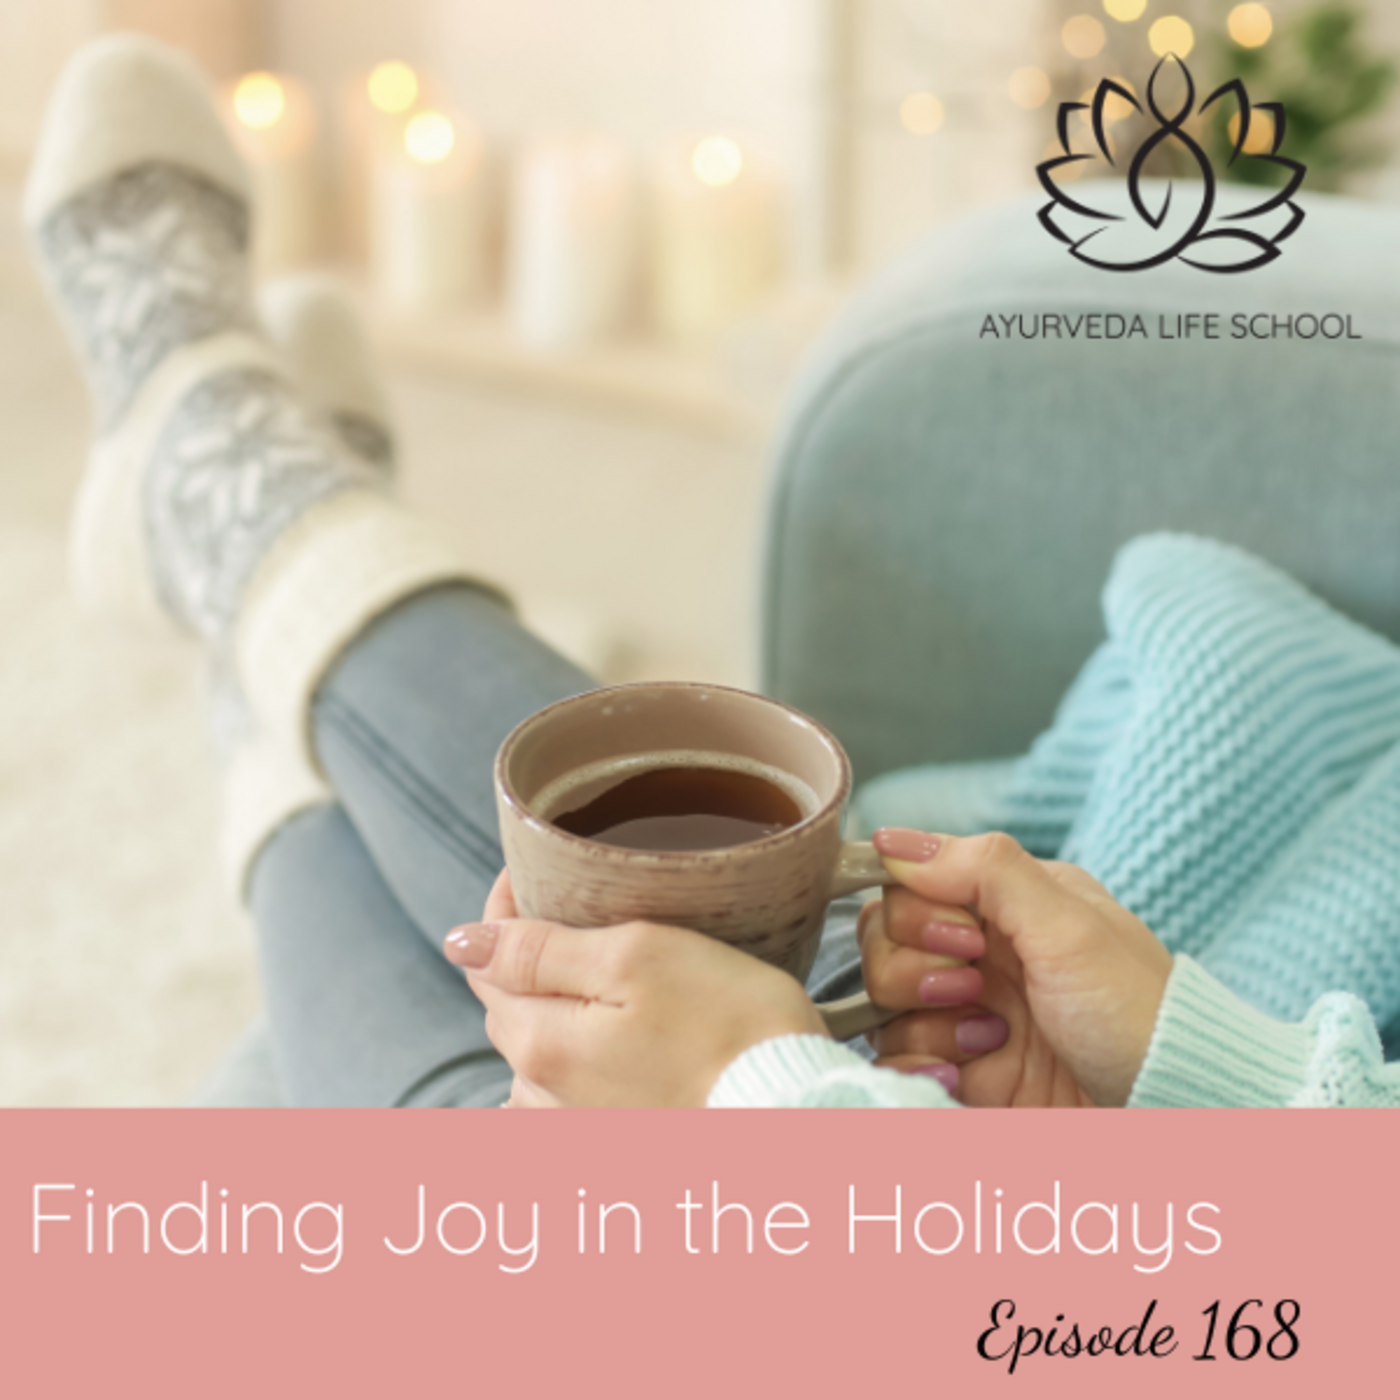 Episode 168: Ep #168: Finding Joy in the Holidays